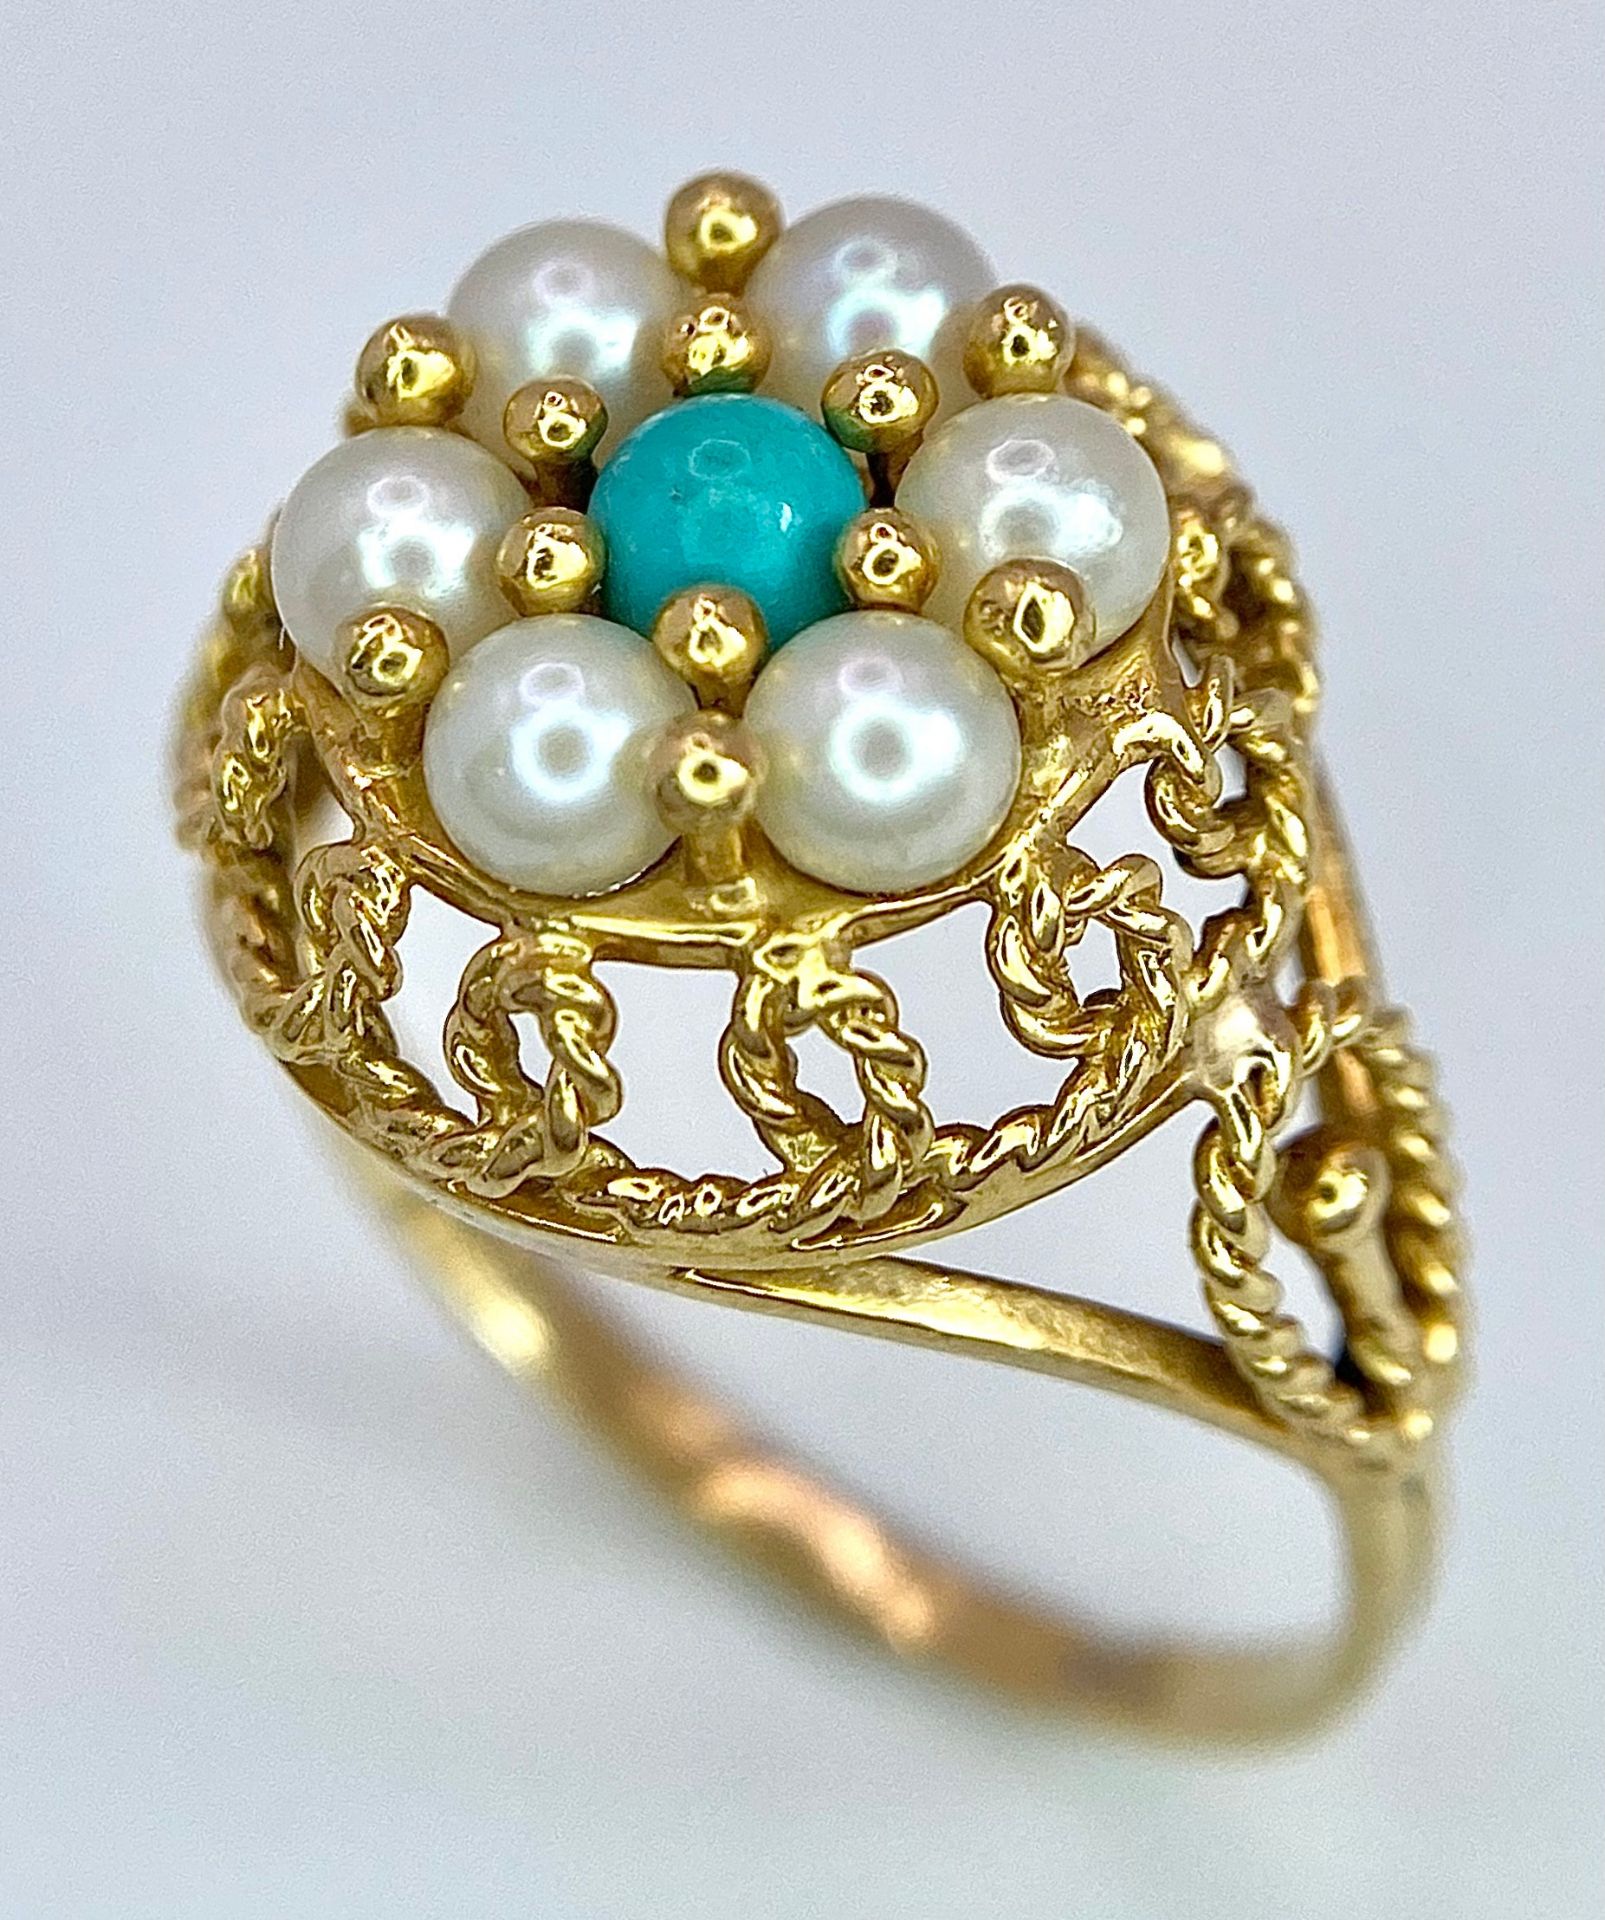 A 14K (TESTED) YELLOW GOLD VINTAGE PEARL & TURQUISE RING. Size K, 2.9g total weight. Ref: SC 9031 - Image 3 of 5